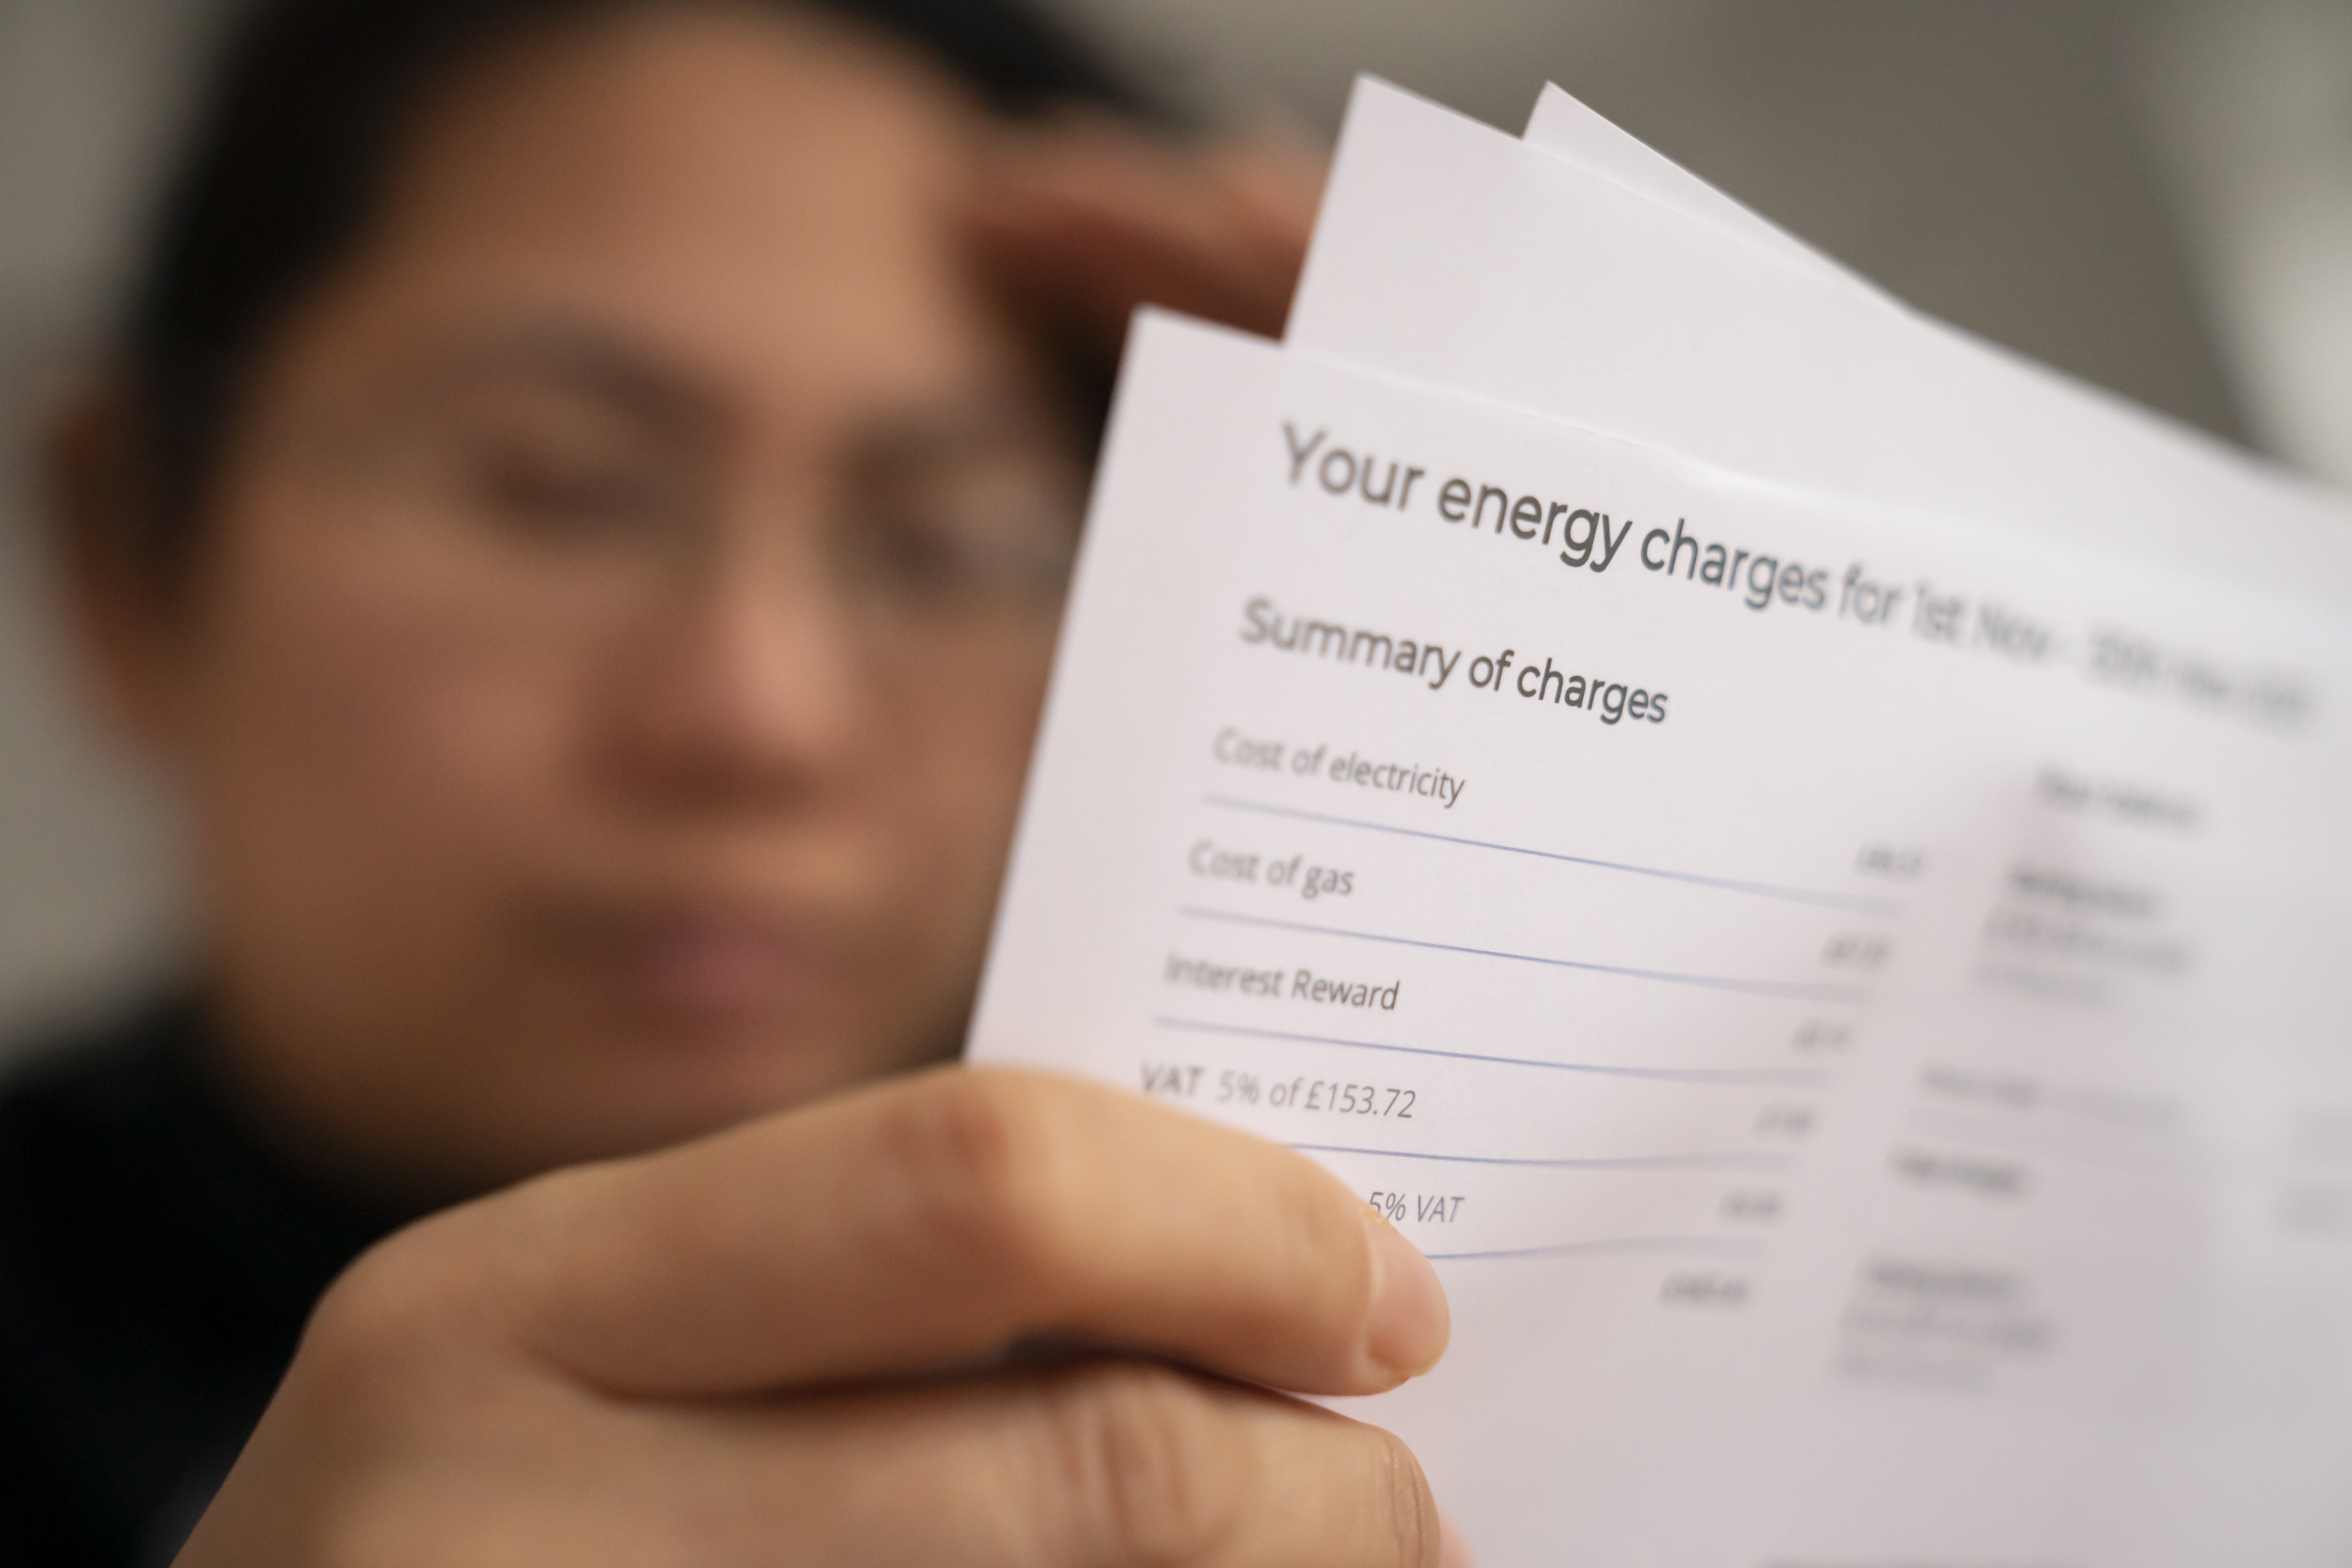 Rising energy bills are adding to householders’ woes